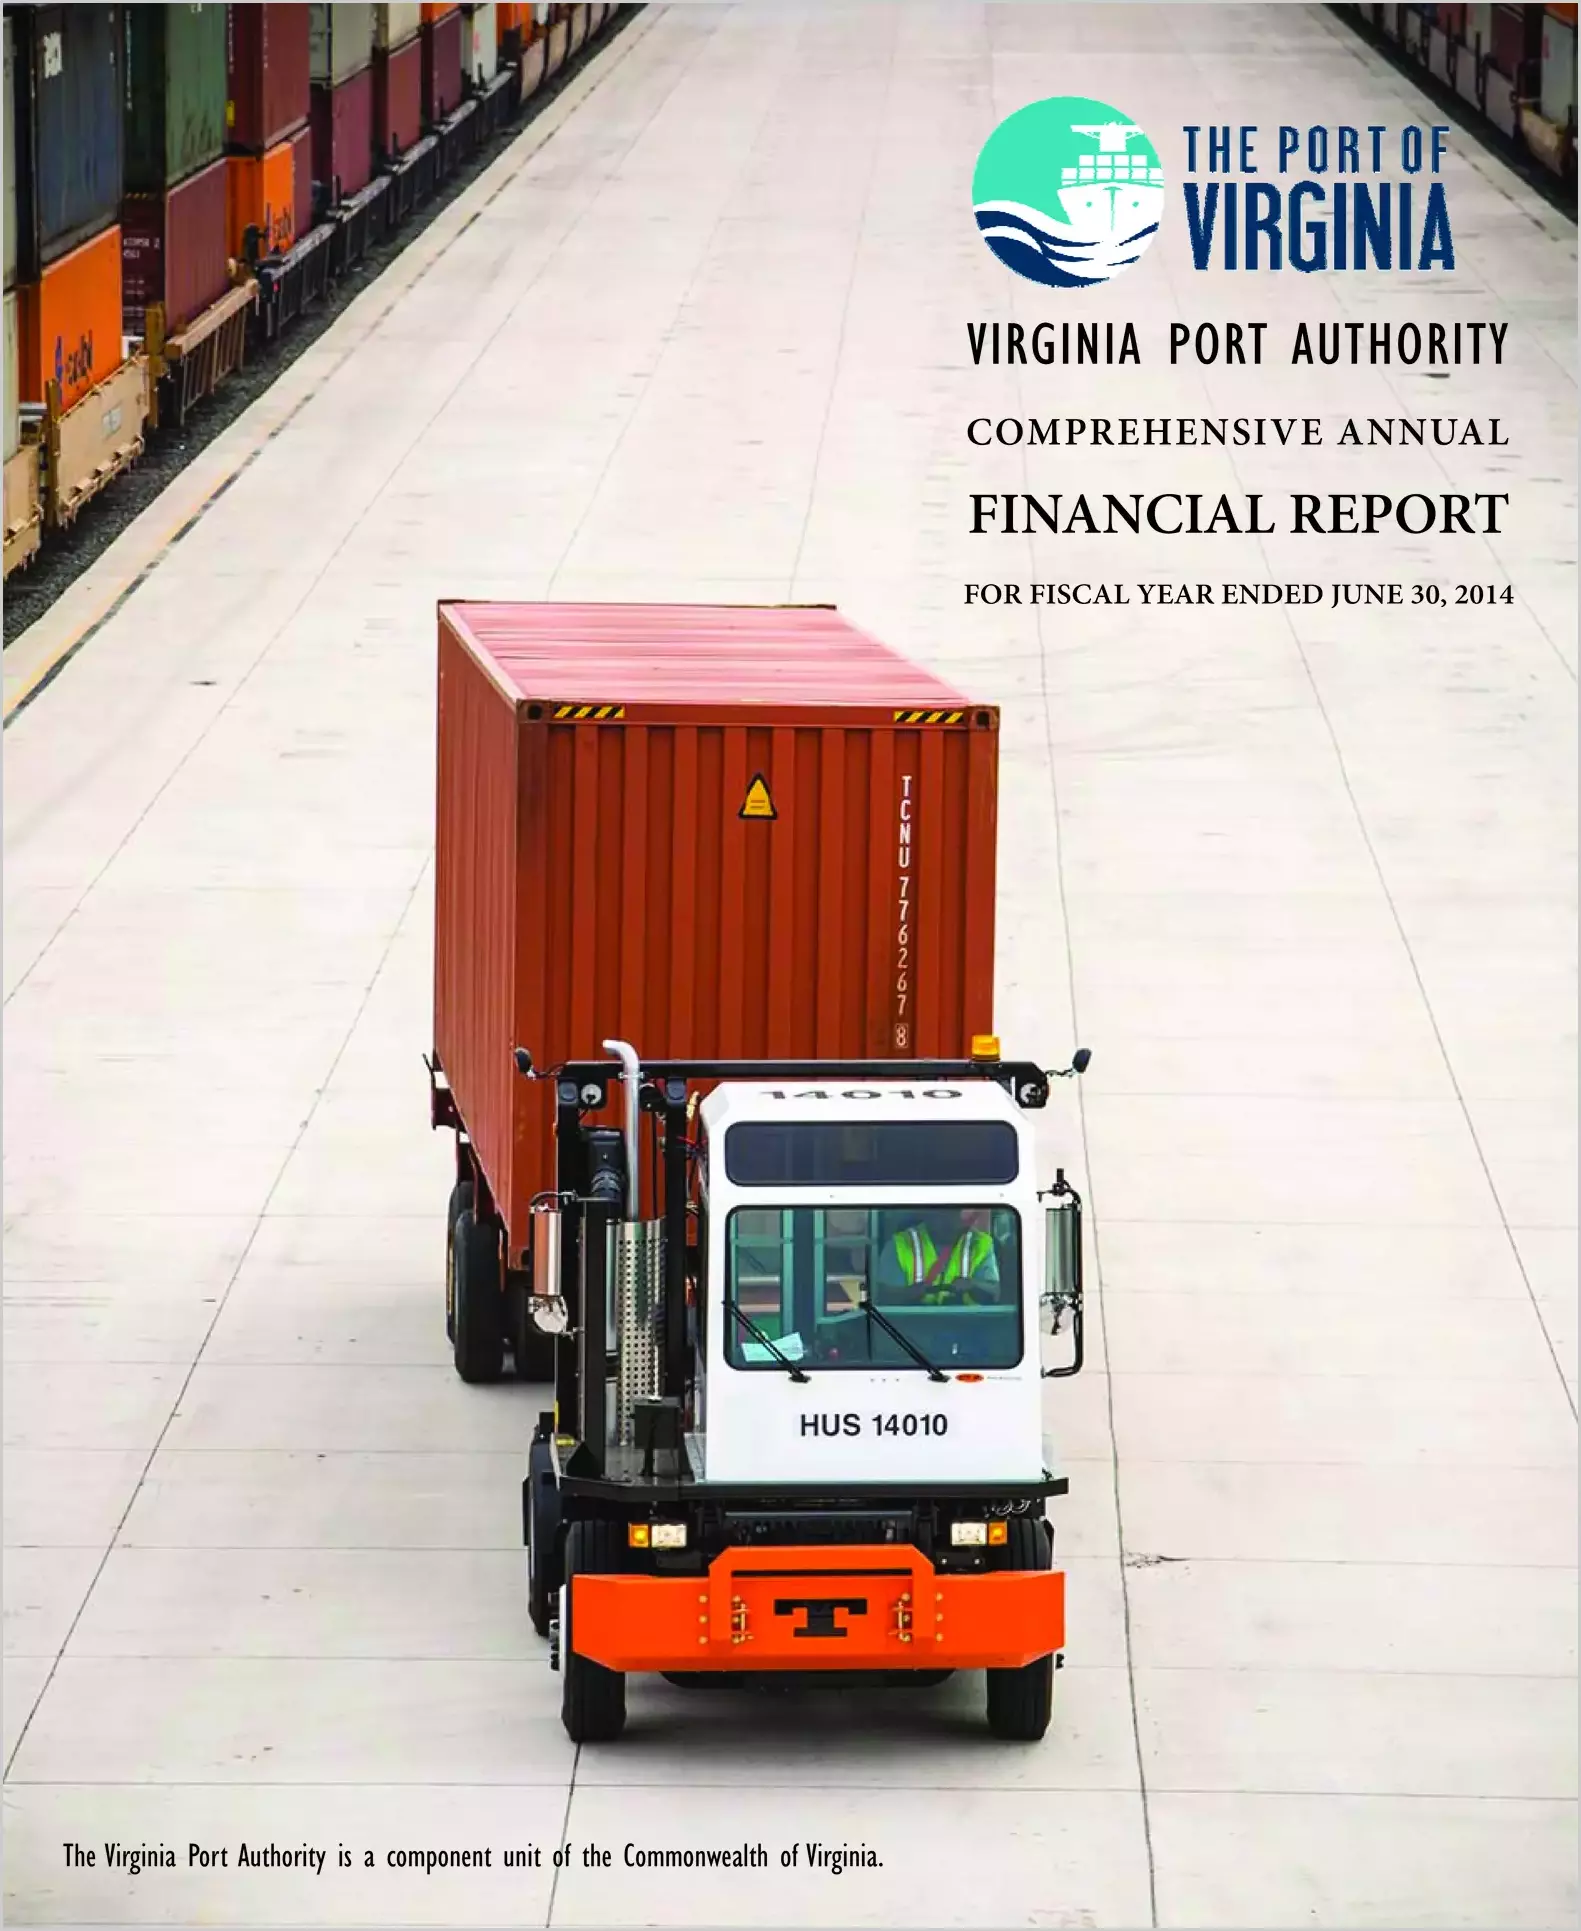 Virginia Port Authority Financial Statements Report for the year ended June 30, 2014